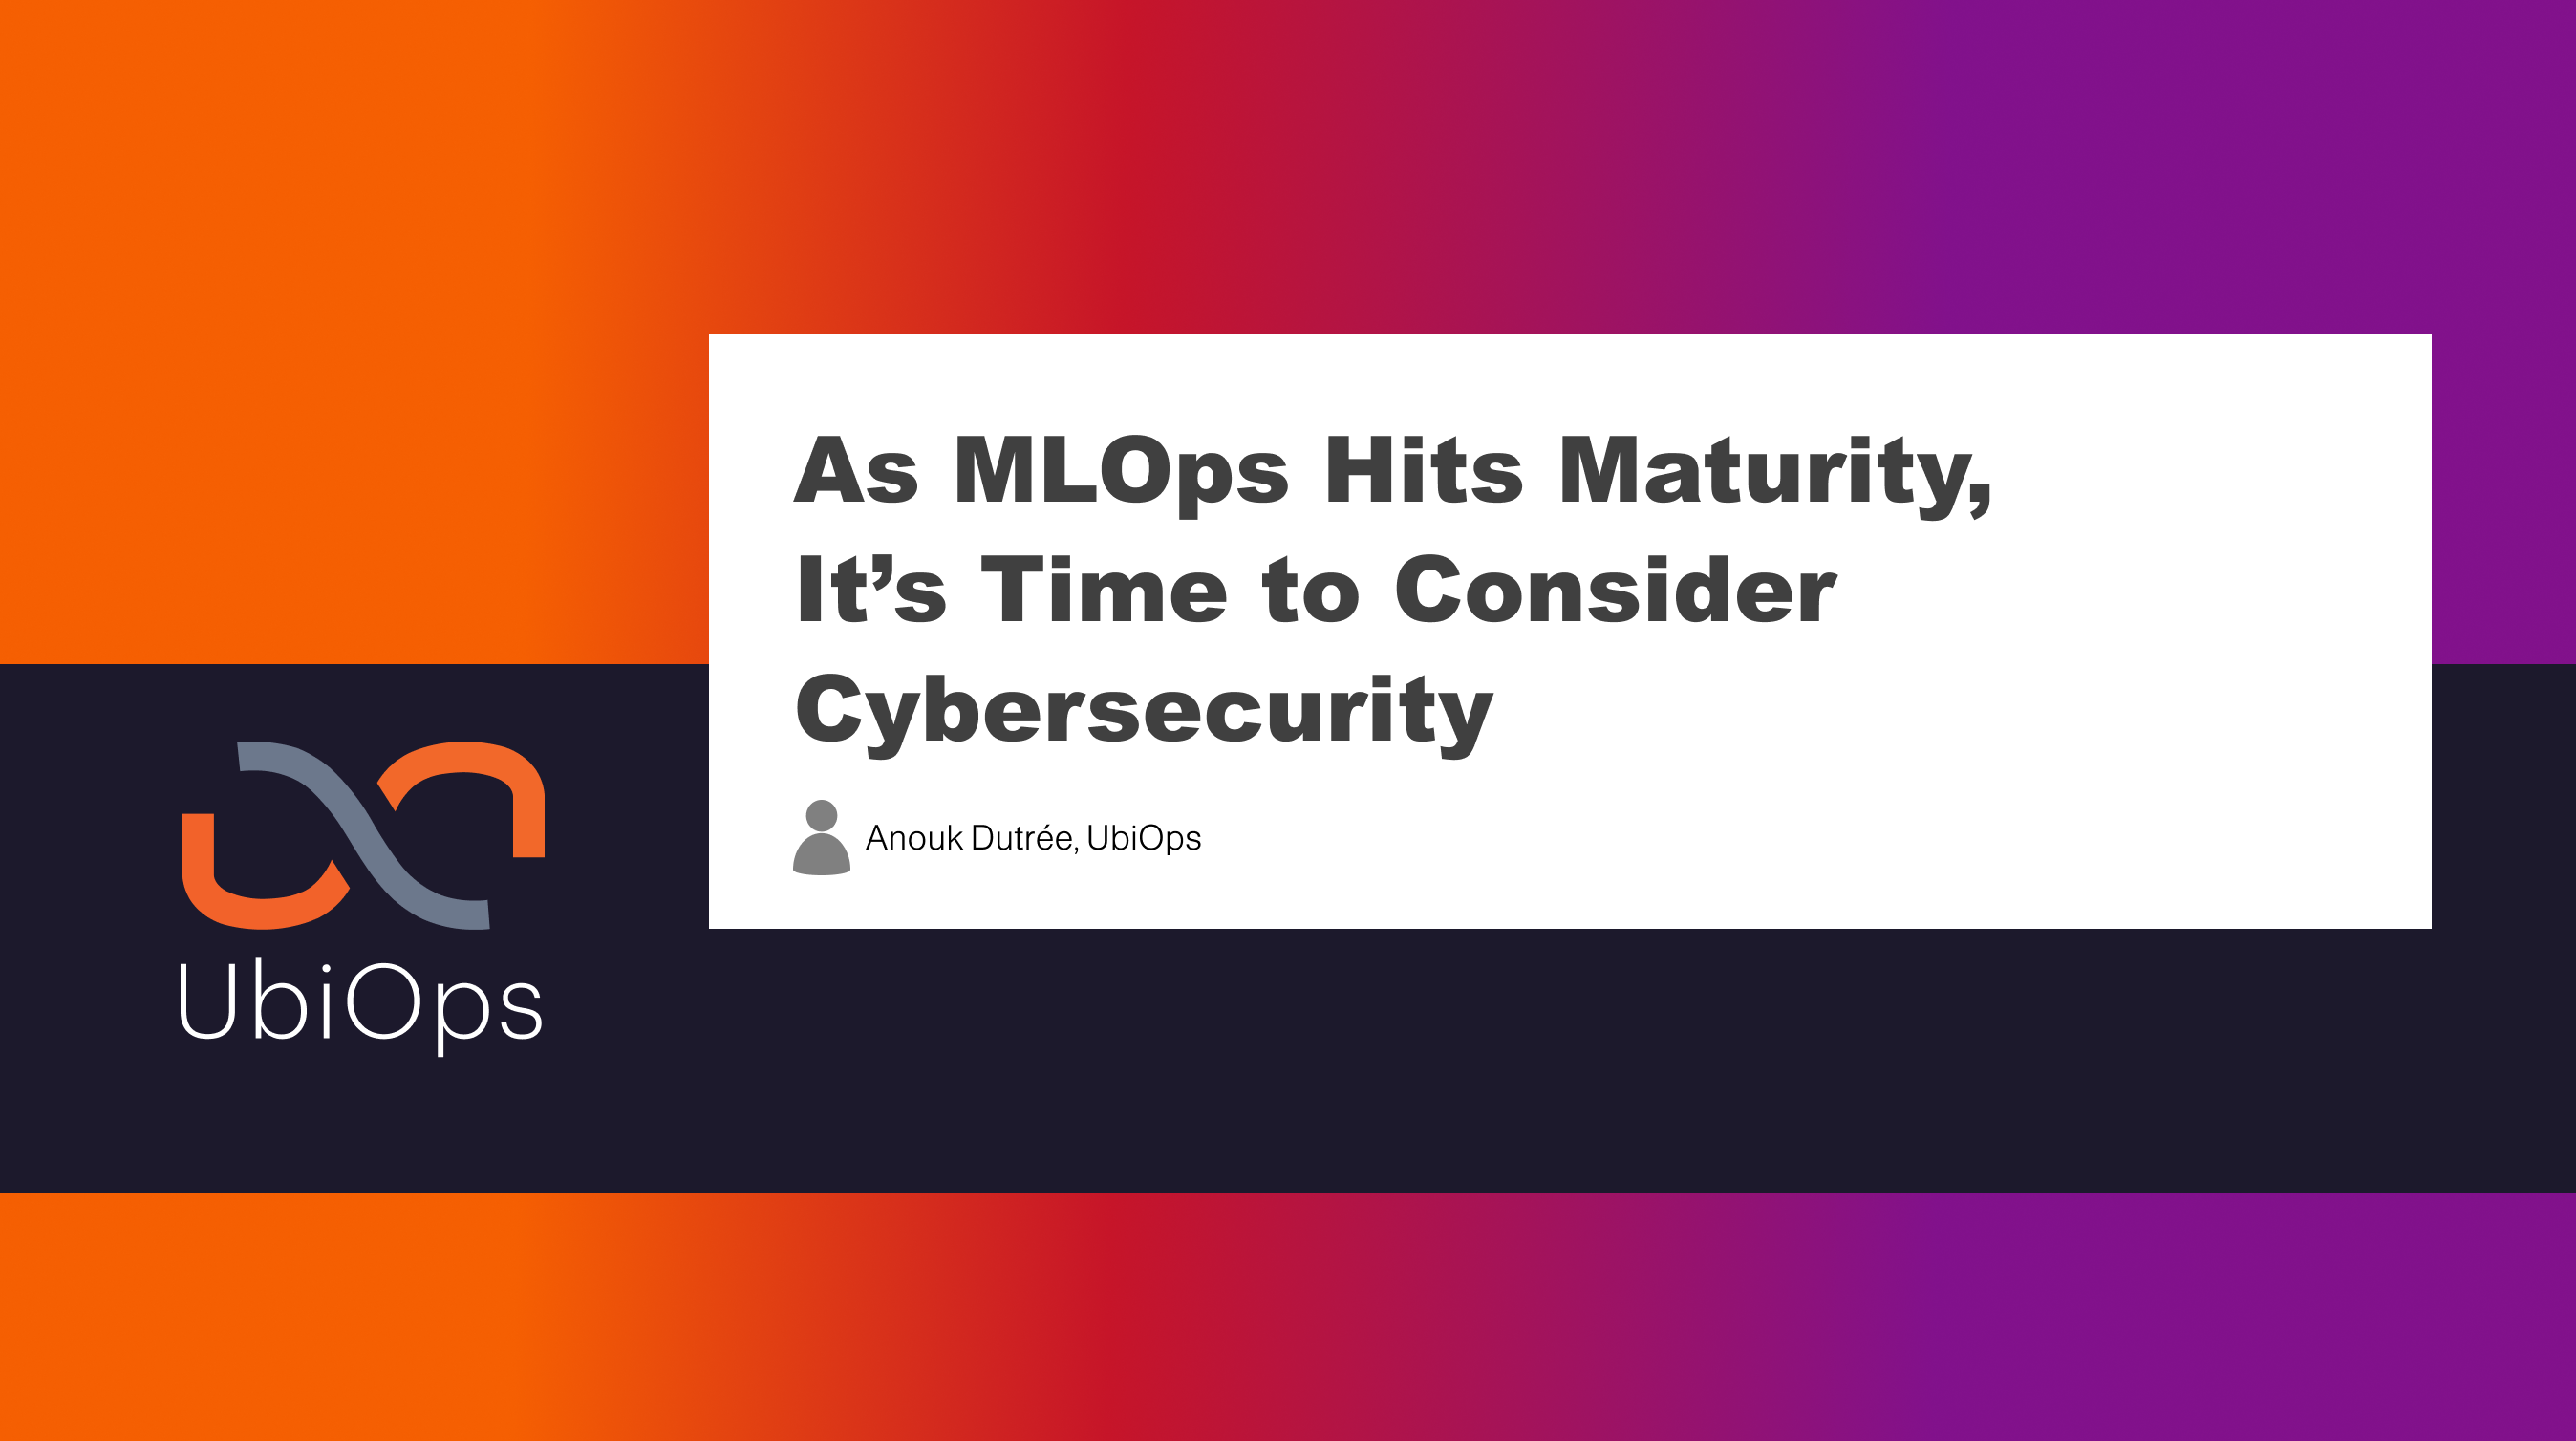 As MLOps Hits Maturity, It’s Time to Consider Cybersecurity